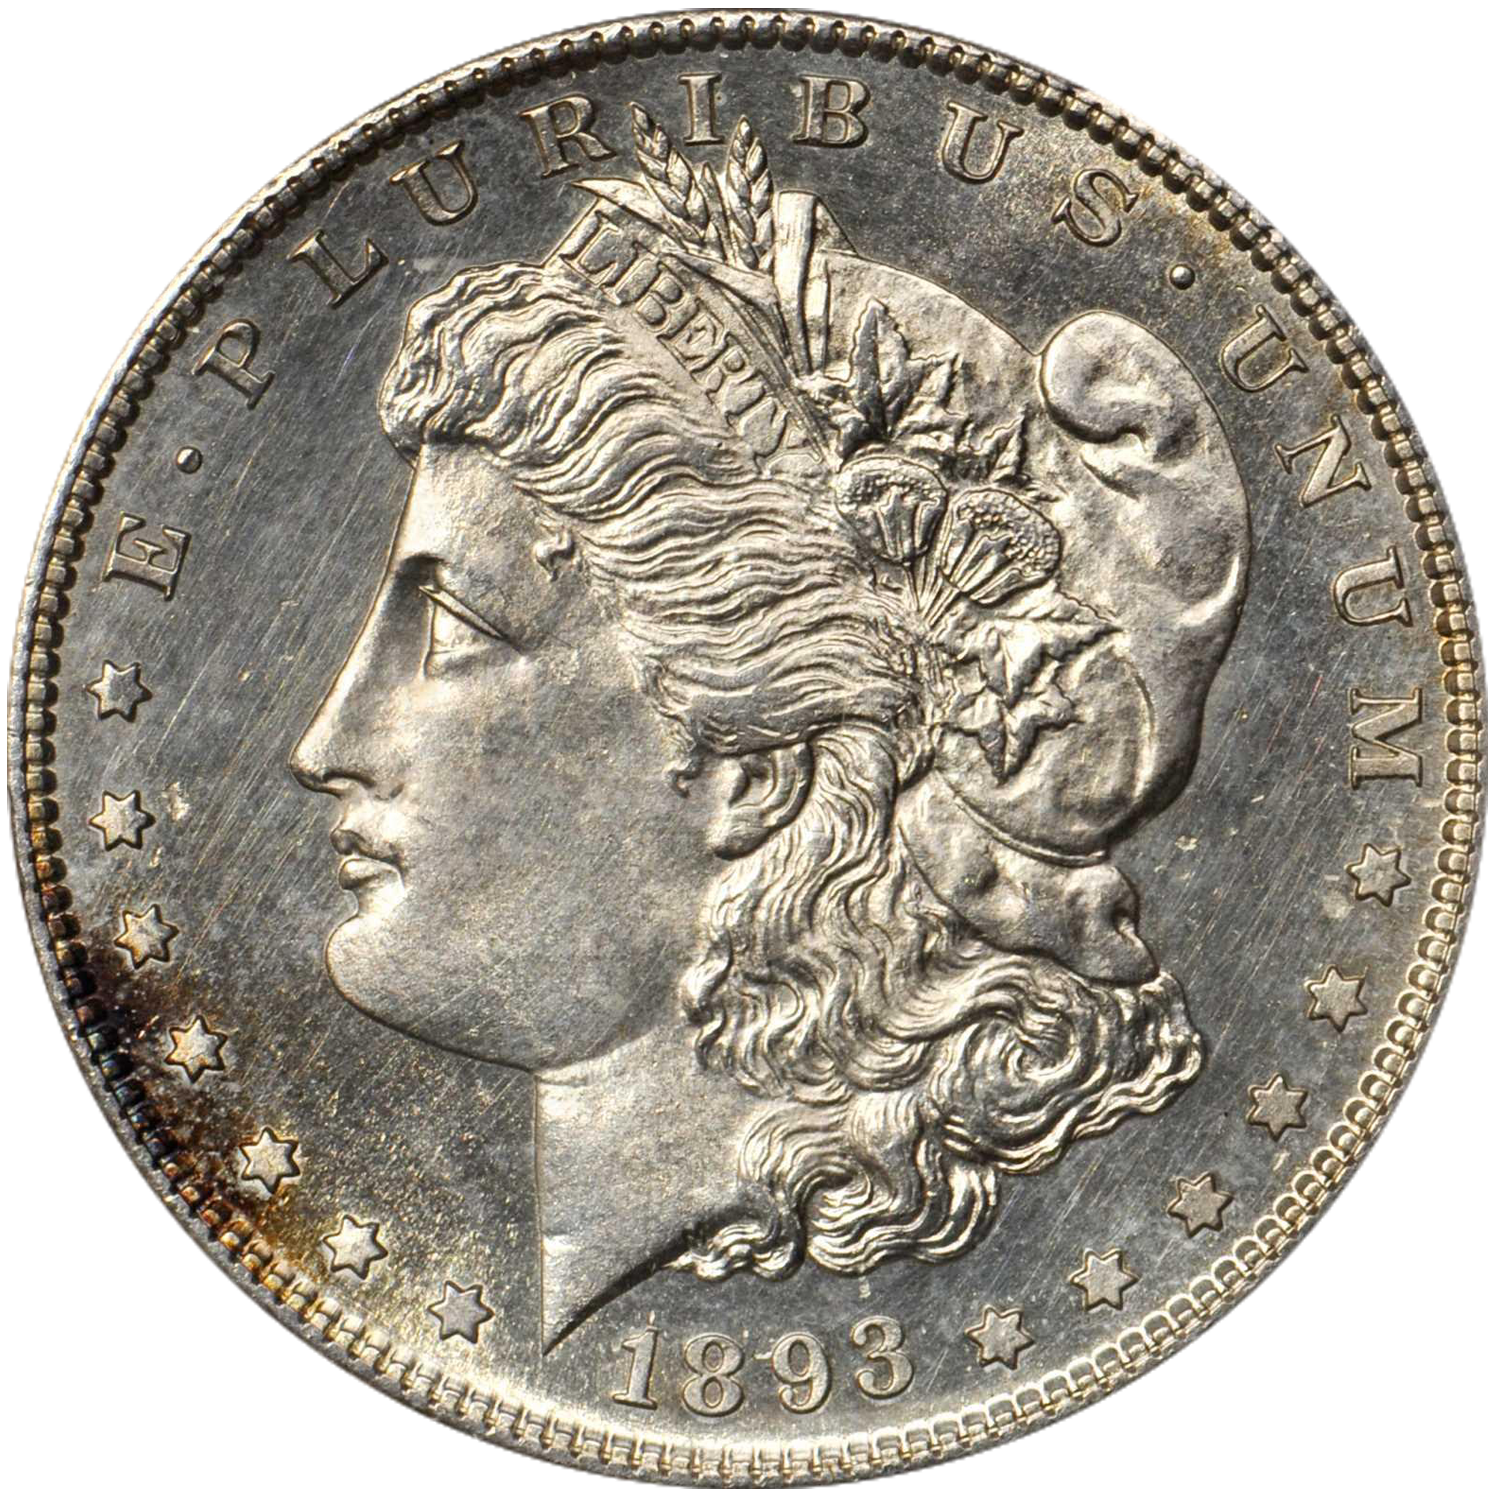 1893 s mint morgan dollar price guide value